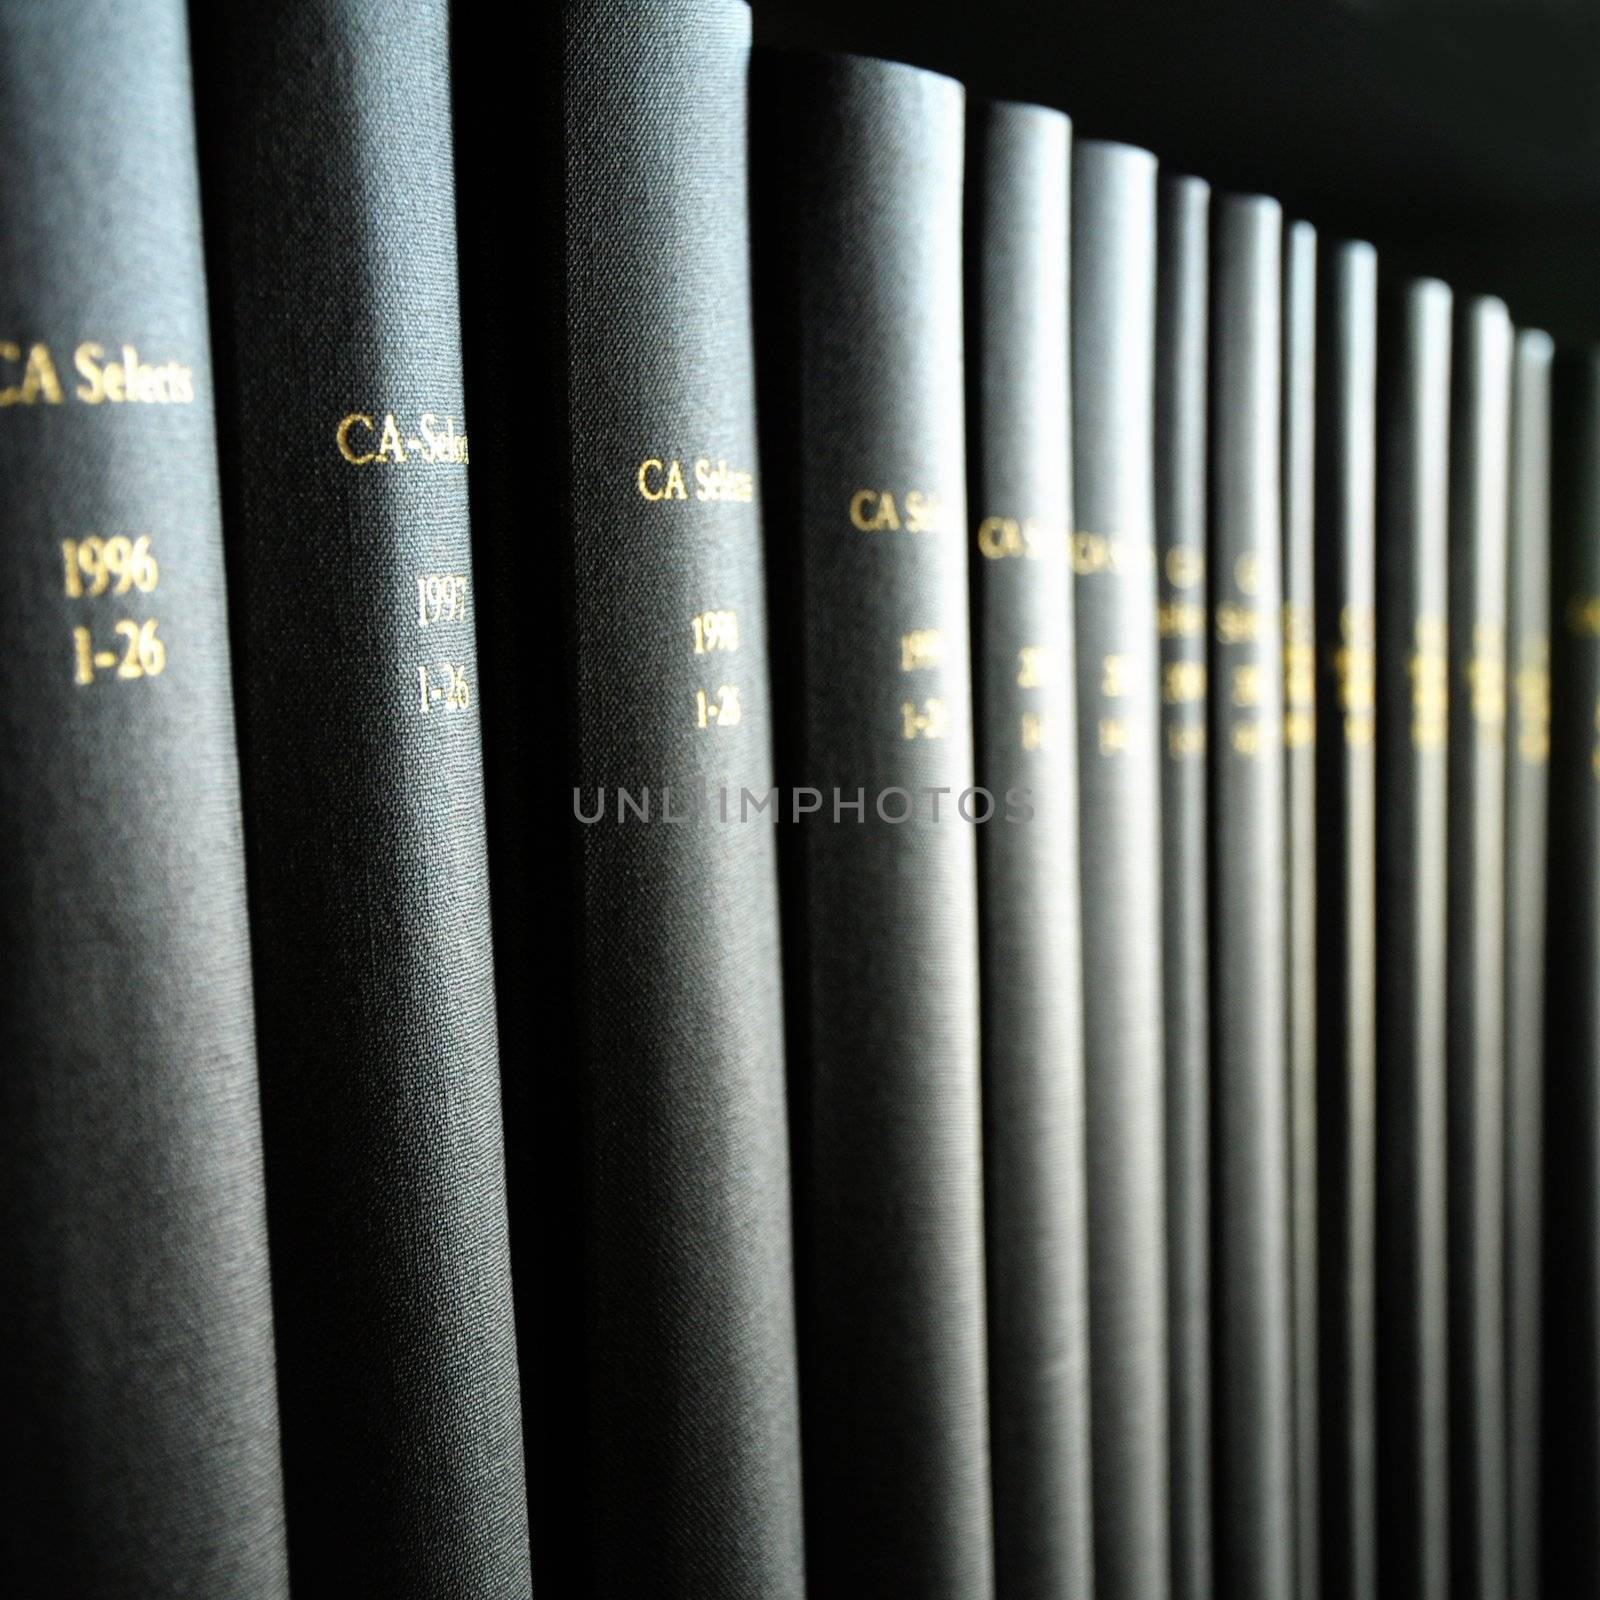 education books in a library showing school or university concept